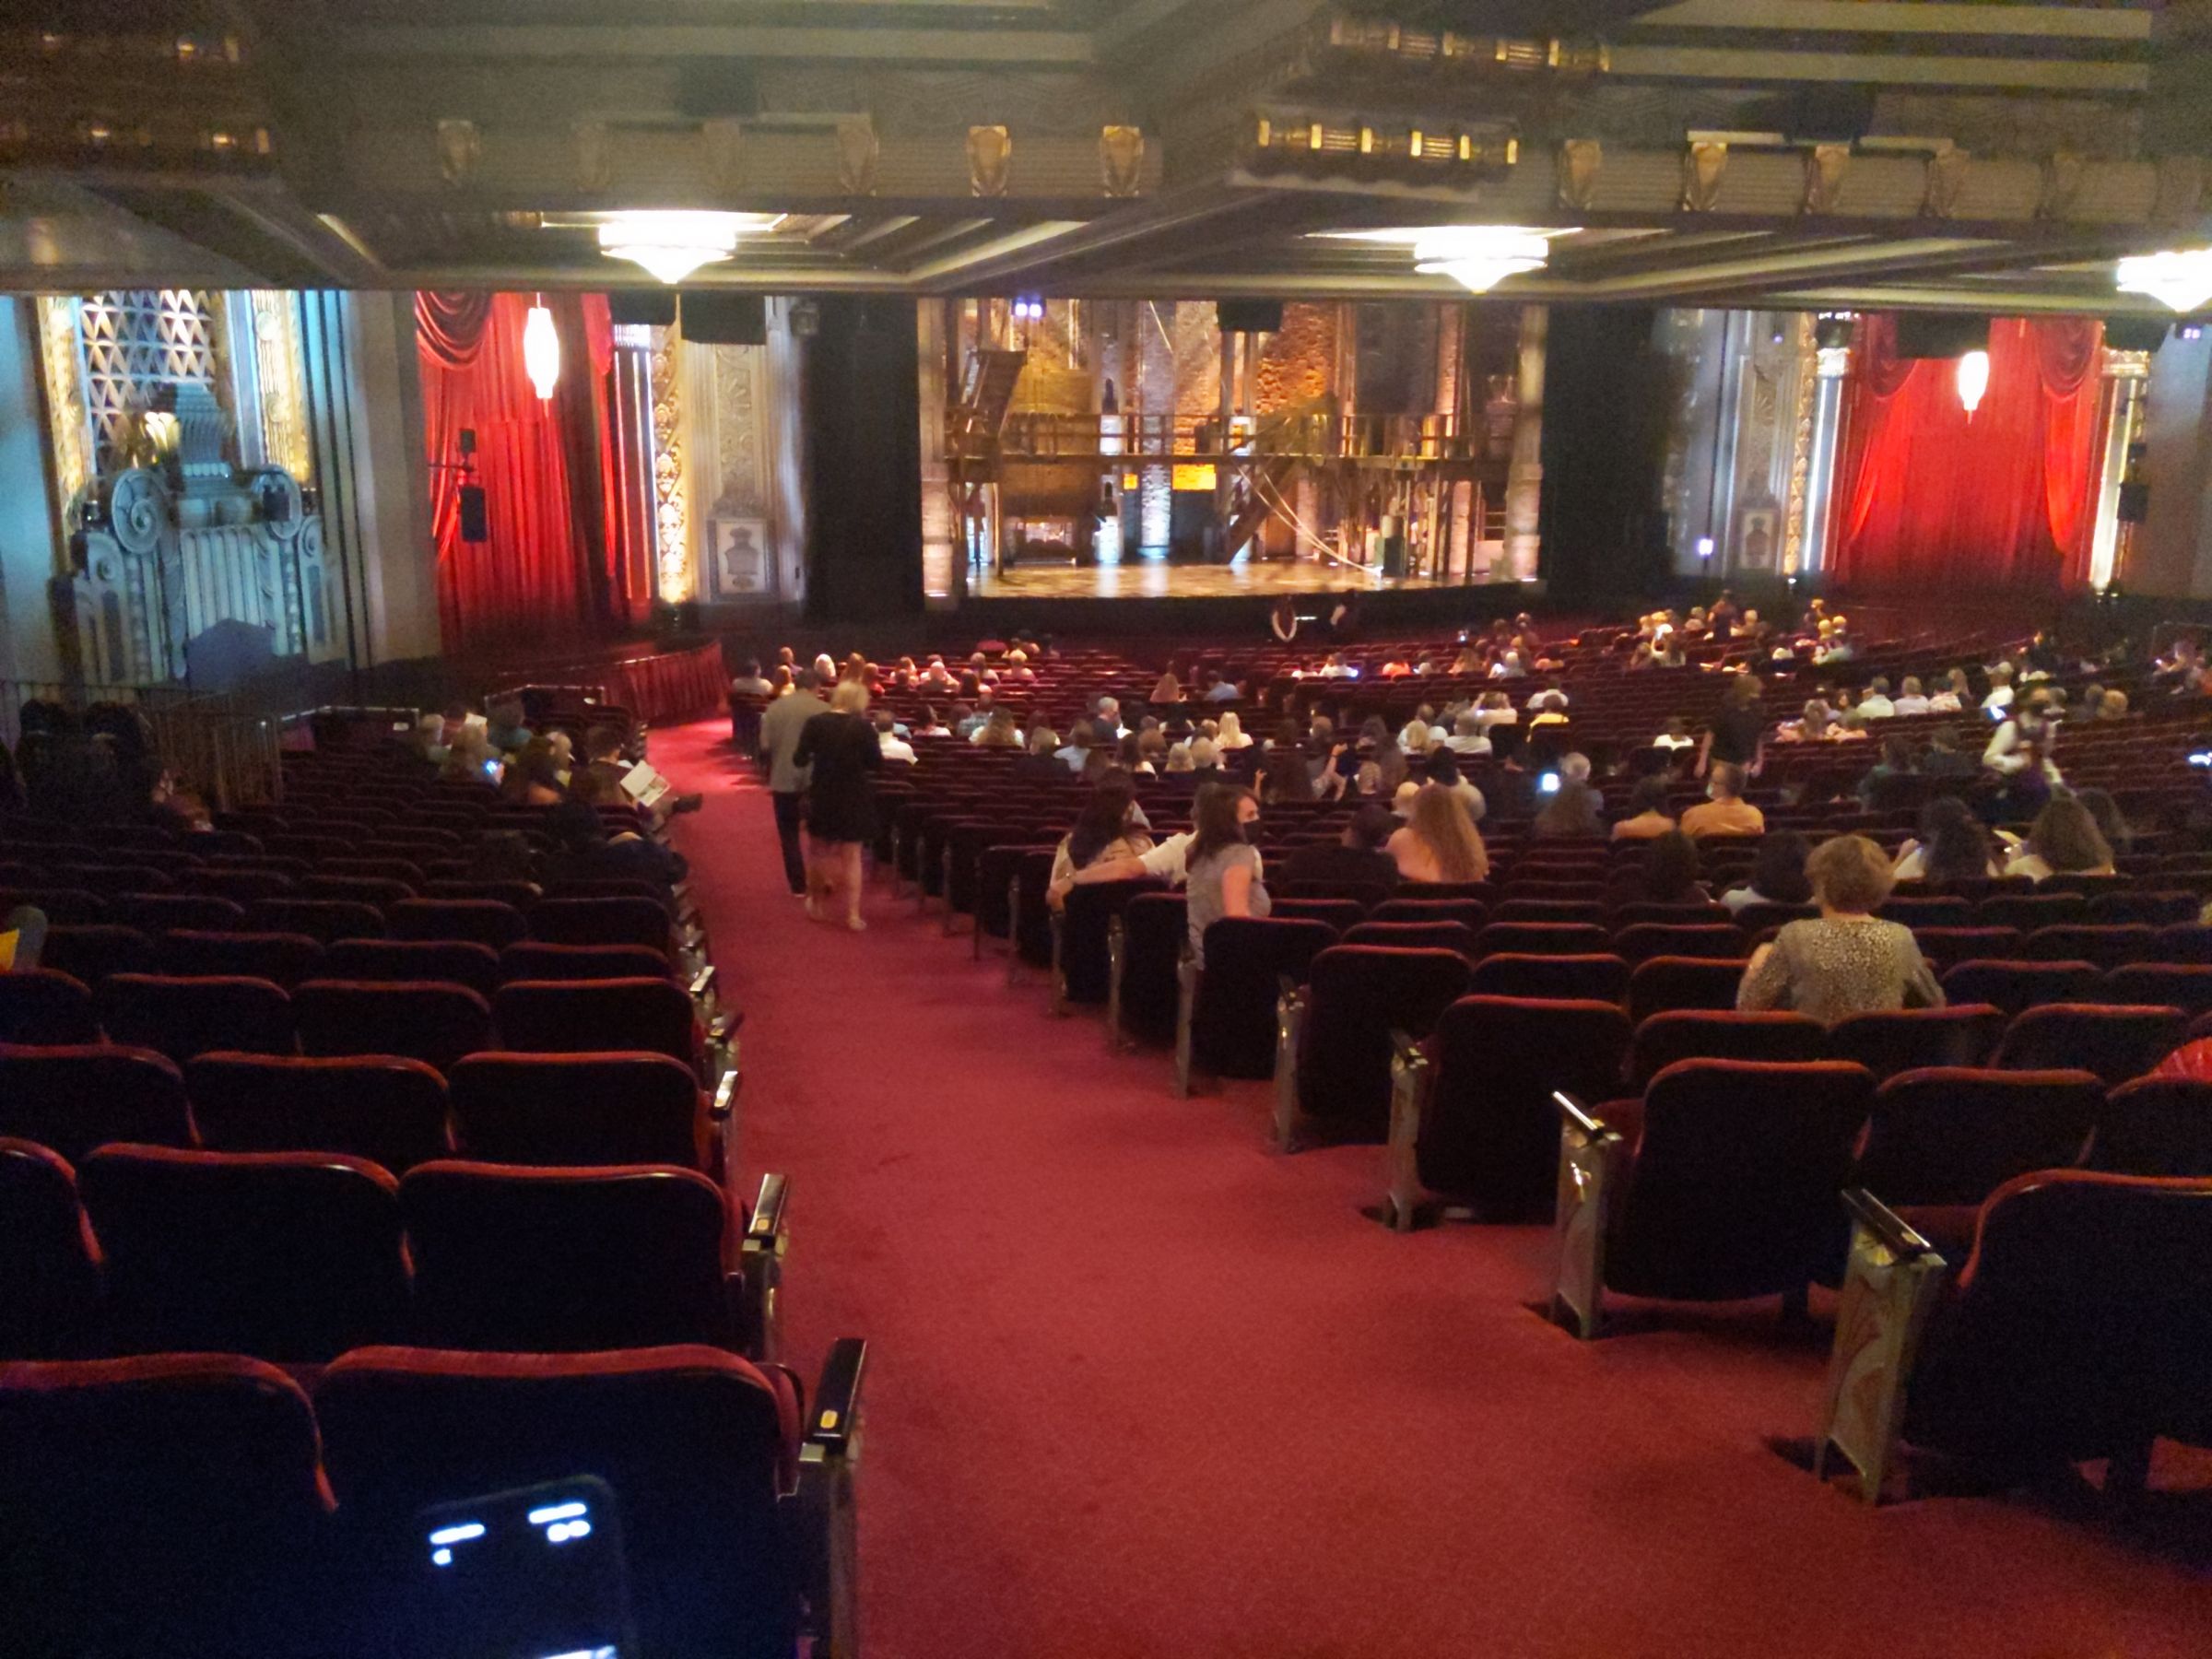 orchestra left, row zz seat view  - hollywood pantages theatre